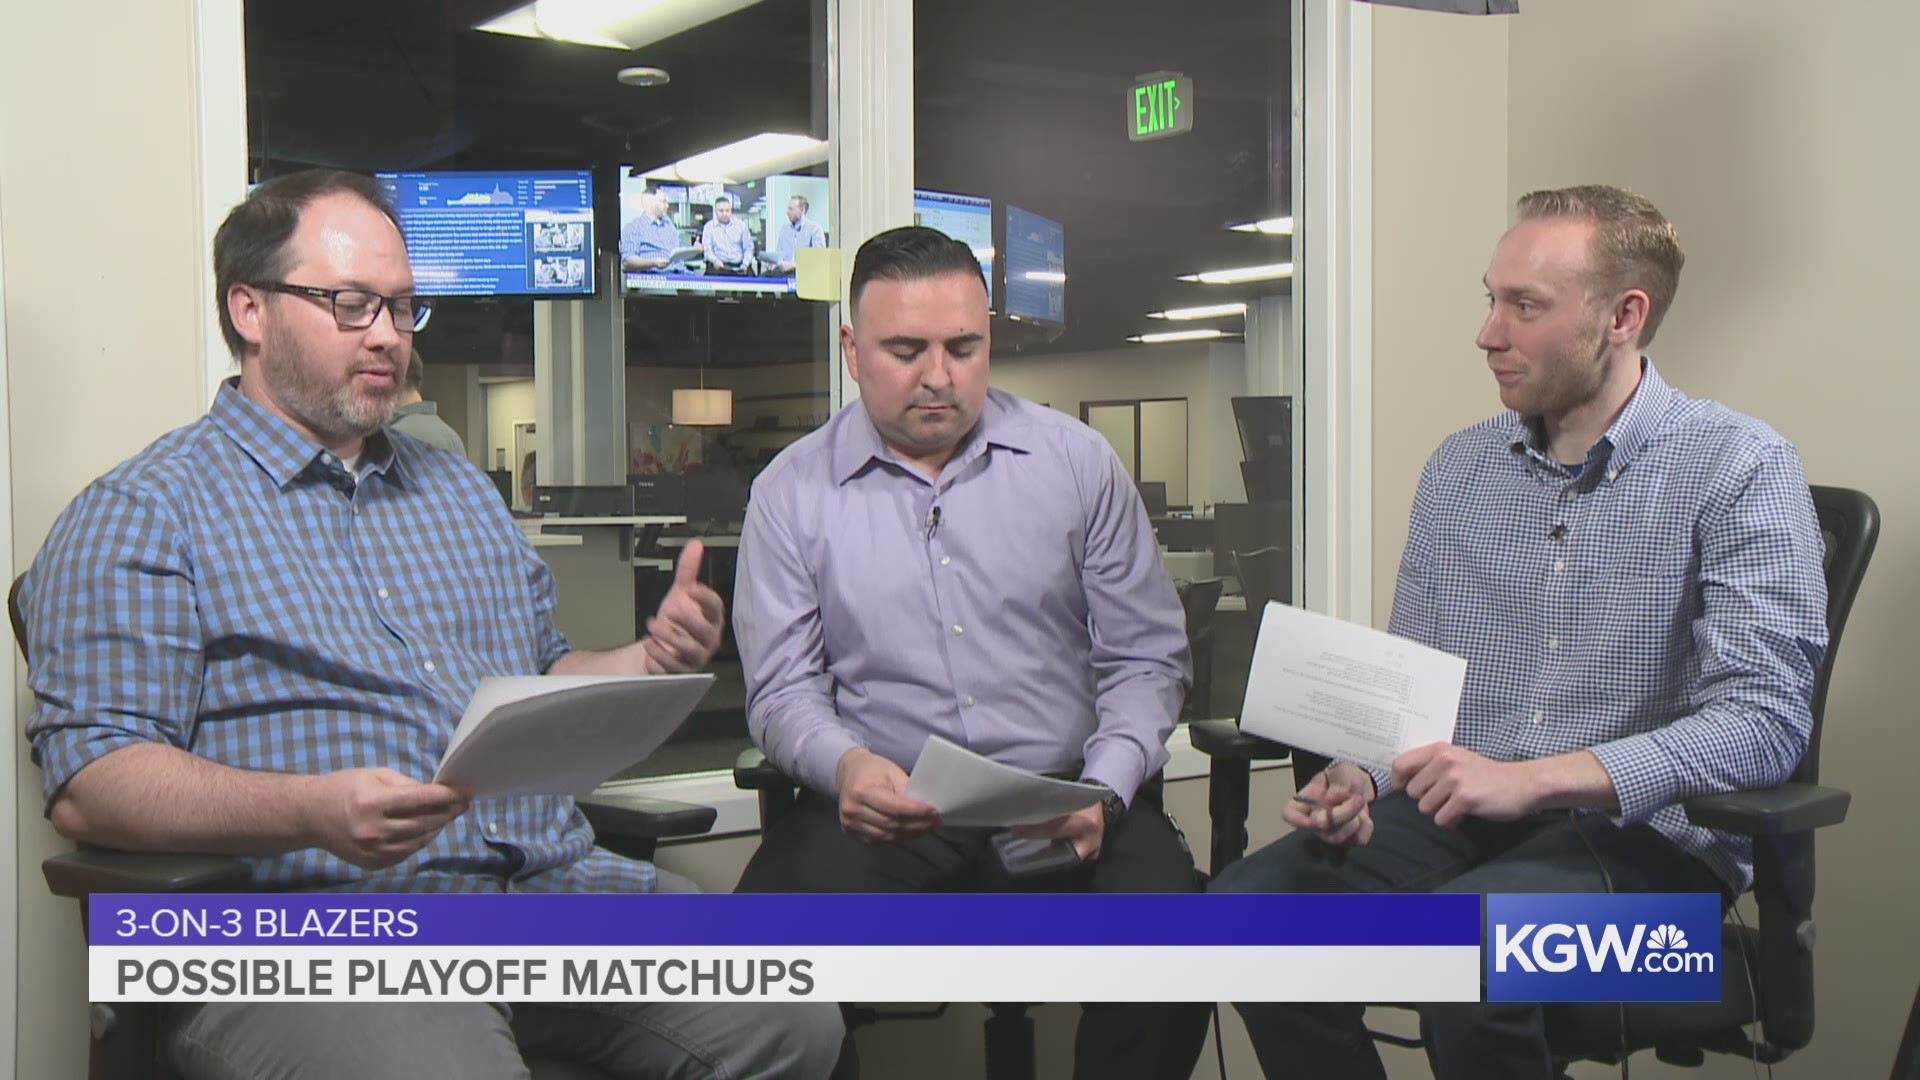 KGW's Jared Cowley, Orlando Sanchez and Nate Hanson debate which would be the best and worst first-round playoff matchups for the Blazers.